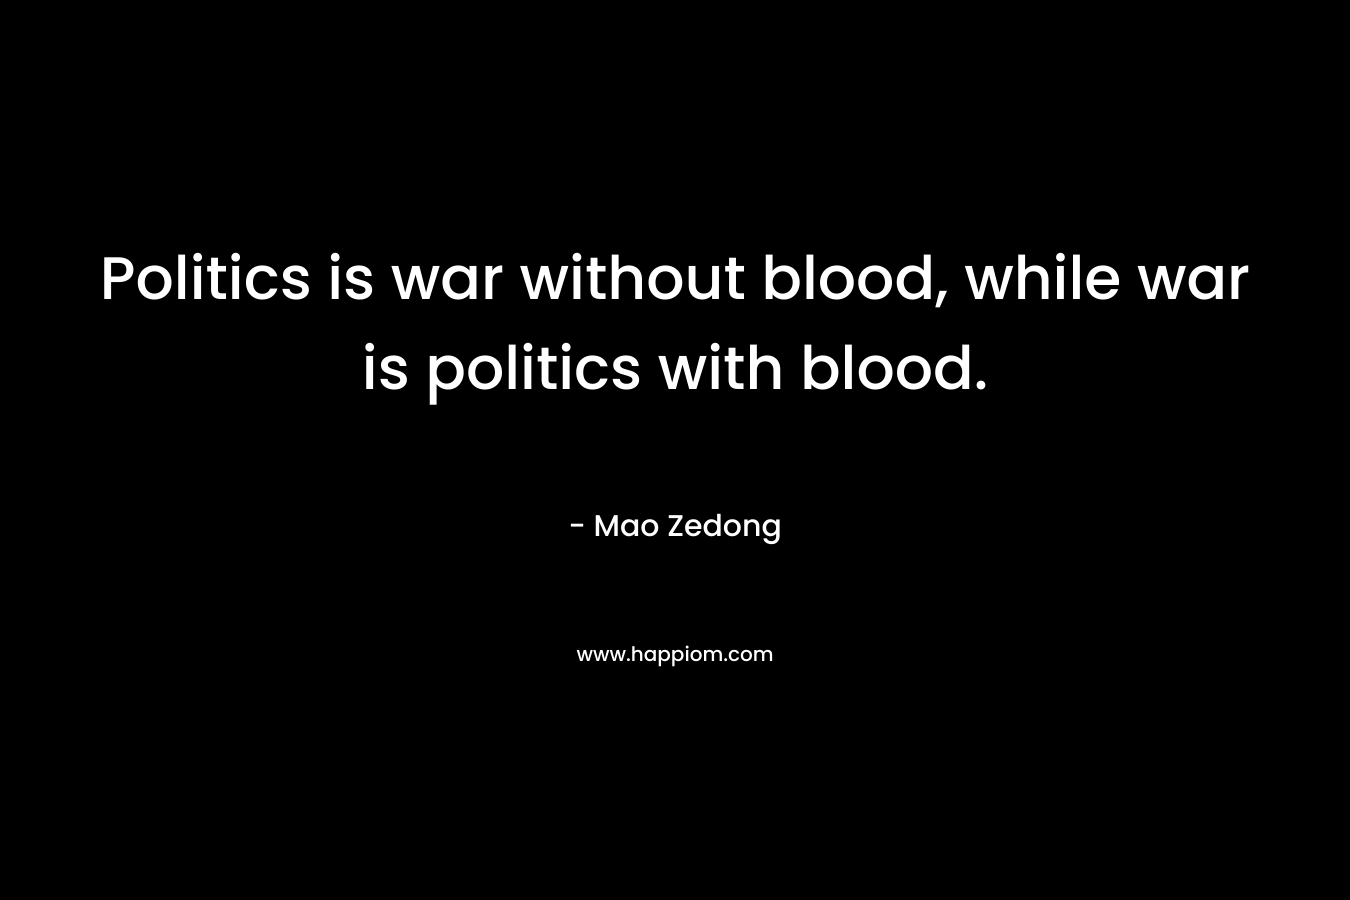 Politics is war without blood, while war is politics with blood. – Mao Zedong